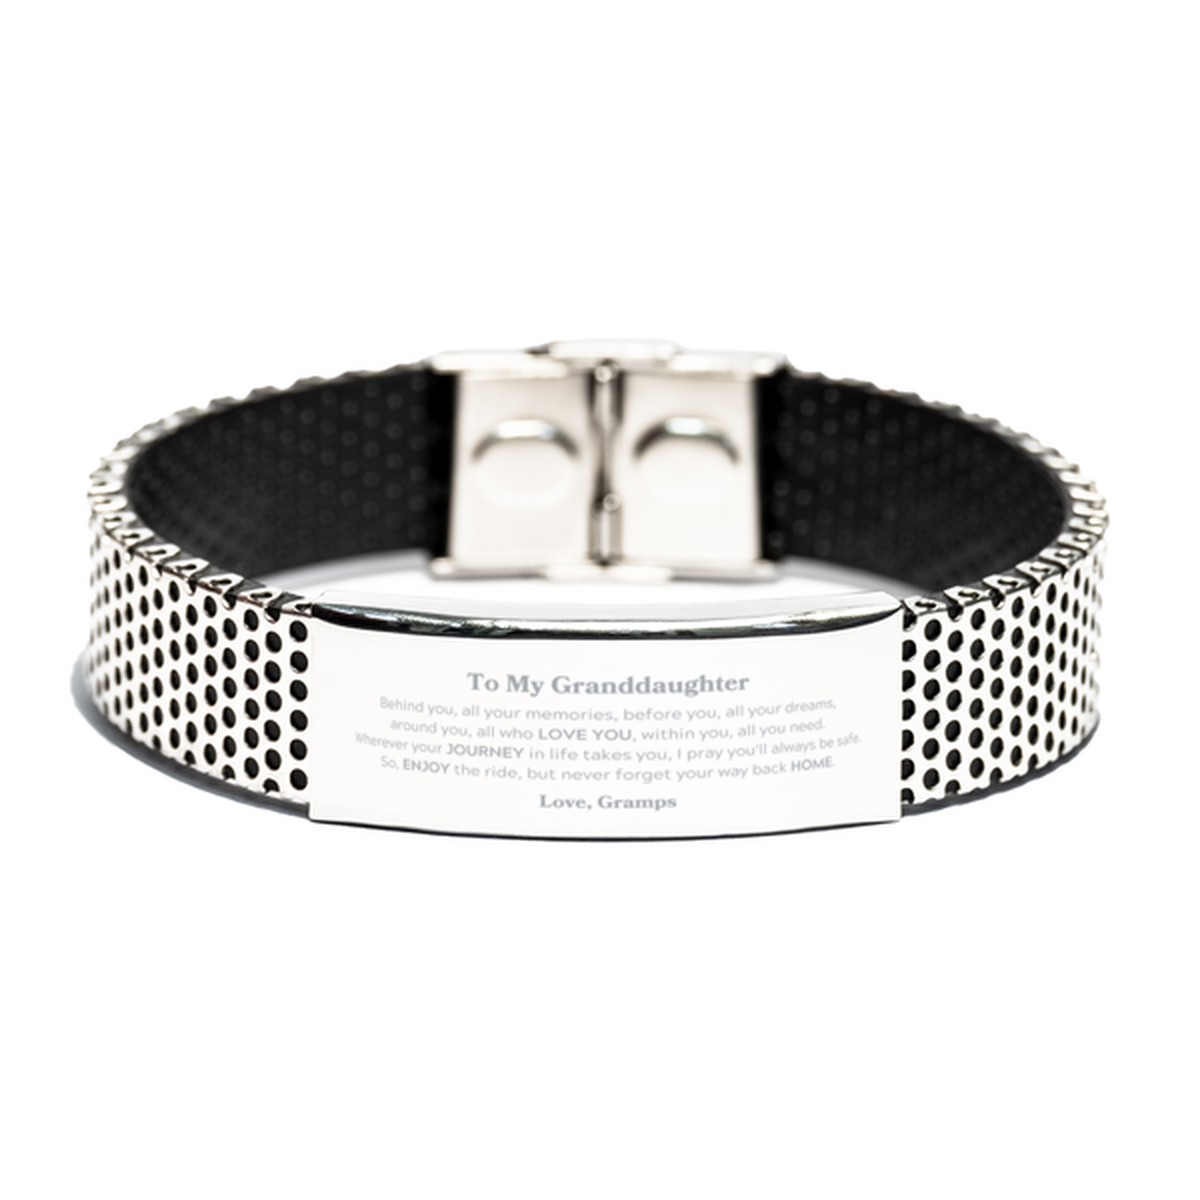 To My Granddaughter Graduation Gifts from Gramps, Granddaughter Stainless Steel Bracelet Christmas Birthday Gifts for Granddaughter Behind you, all your memories, before you, all your dreams. Love, Gramps